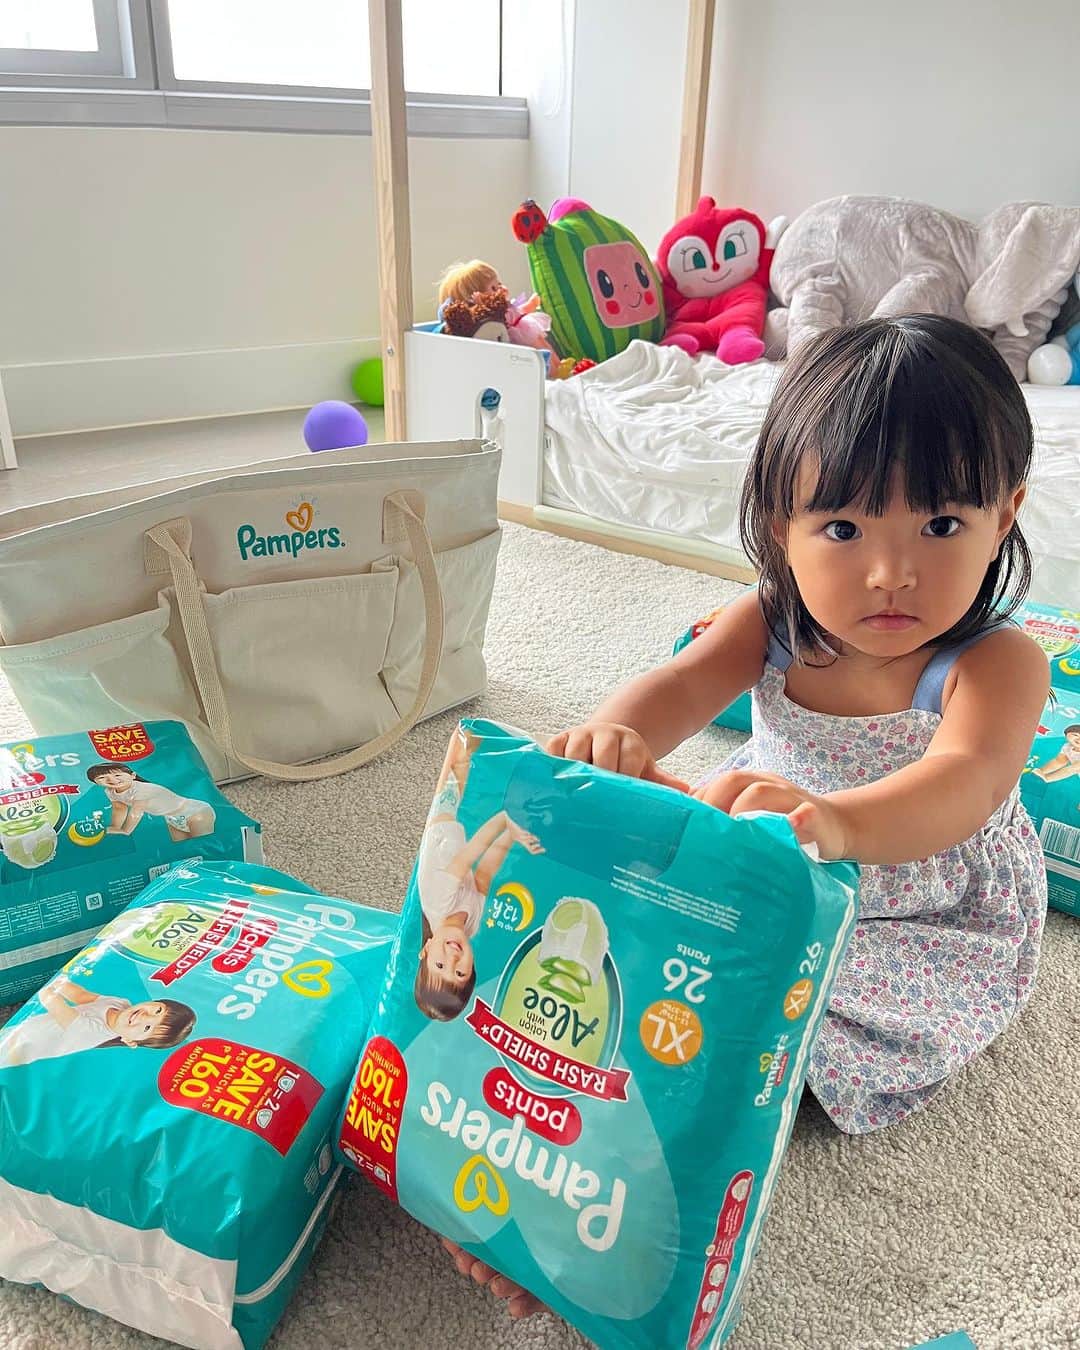 HISANAのインスタグラム：「Hey Mamas!  Big news—I’m thrilled to share that I’m now an ambassador for @Pampersph , a brand we’ve trusted since Suzu was a newborn👧🏻🩷 We're super excited to take you and your little ones to Aloe World! It's the perfect place to share how the new Pampers Pants with Aloe Lotion makes our days smoother.   No more pausing playtime for diaper changes. With Pampers, one diaper goes a long way - it's like having two in one! That's dryness, comfort, and savings of ₱160 a month all rolled into one.  Join us on November 25th at SM MOA Music Hall for fun and learn all about it. Remember, with Pampers, we're saying goodbye to constant checks and hello to lasting moments🫶  #SayAloeToPampers #MyBabyTalks #PampersPH」